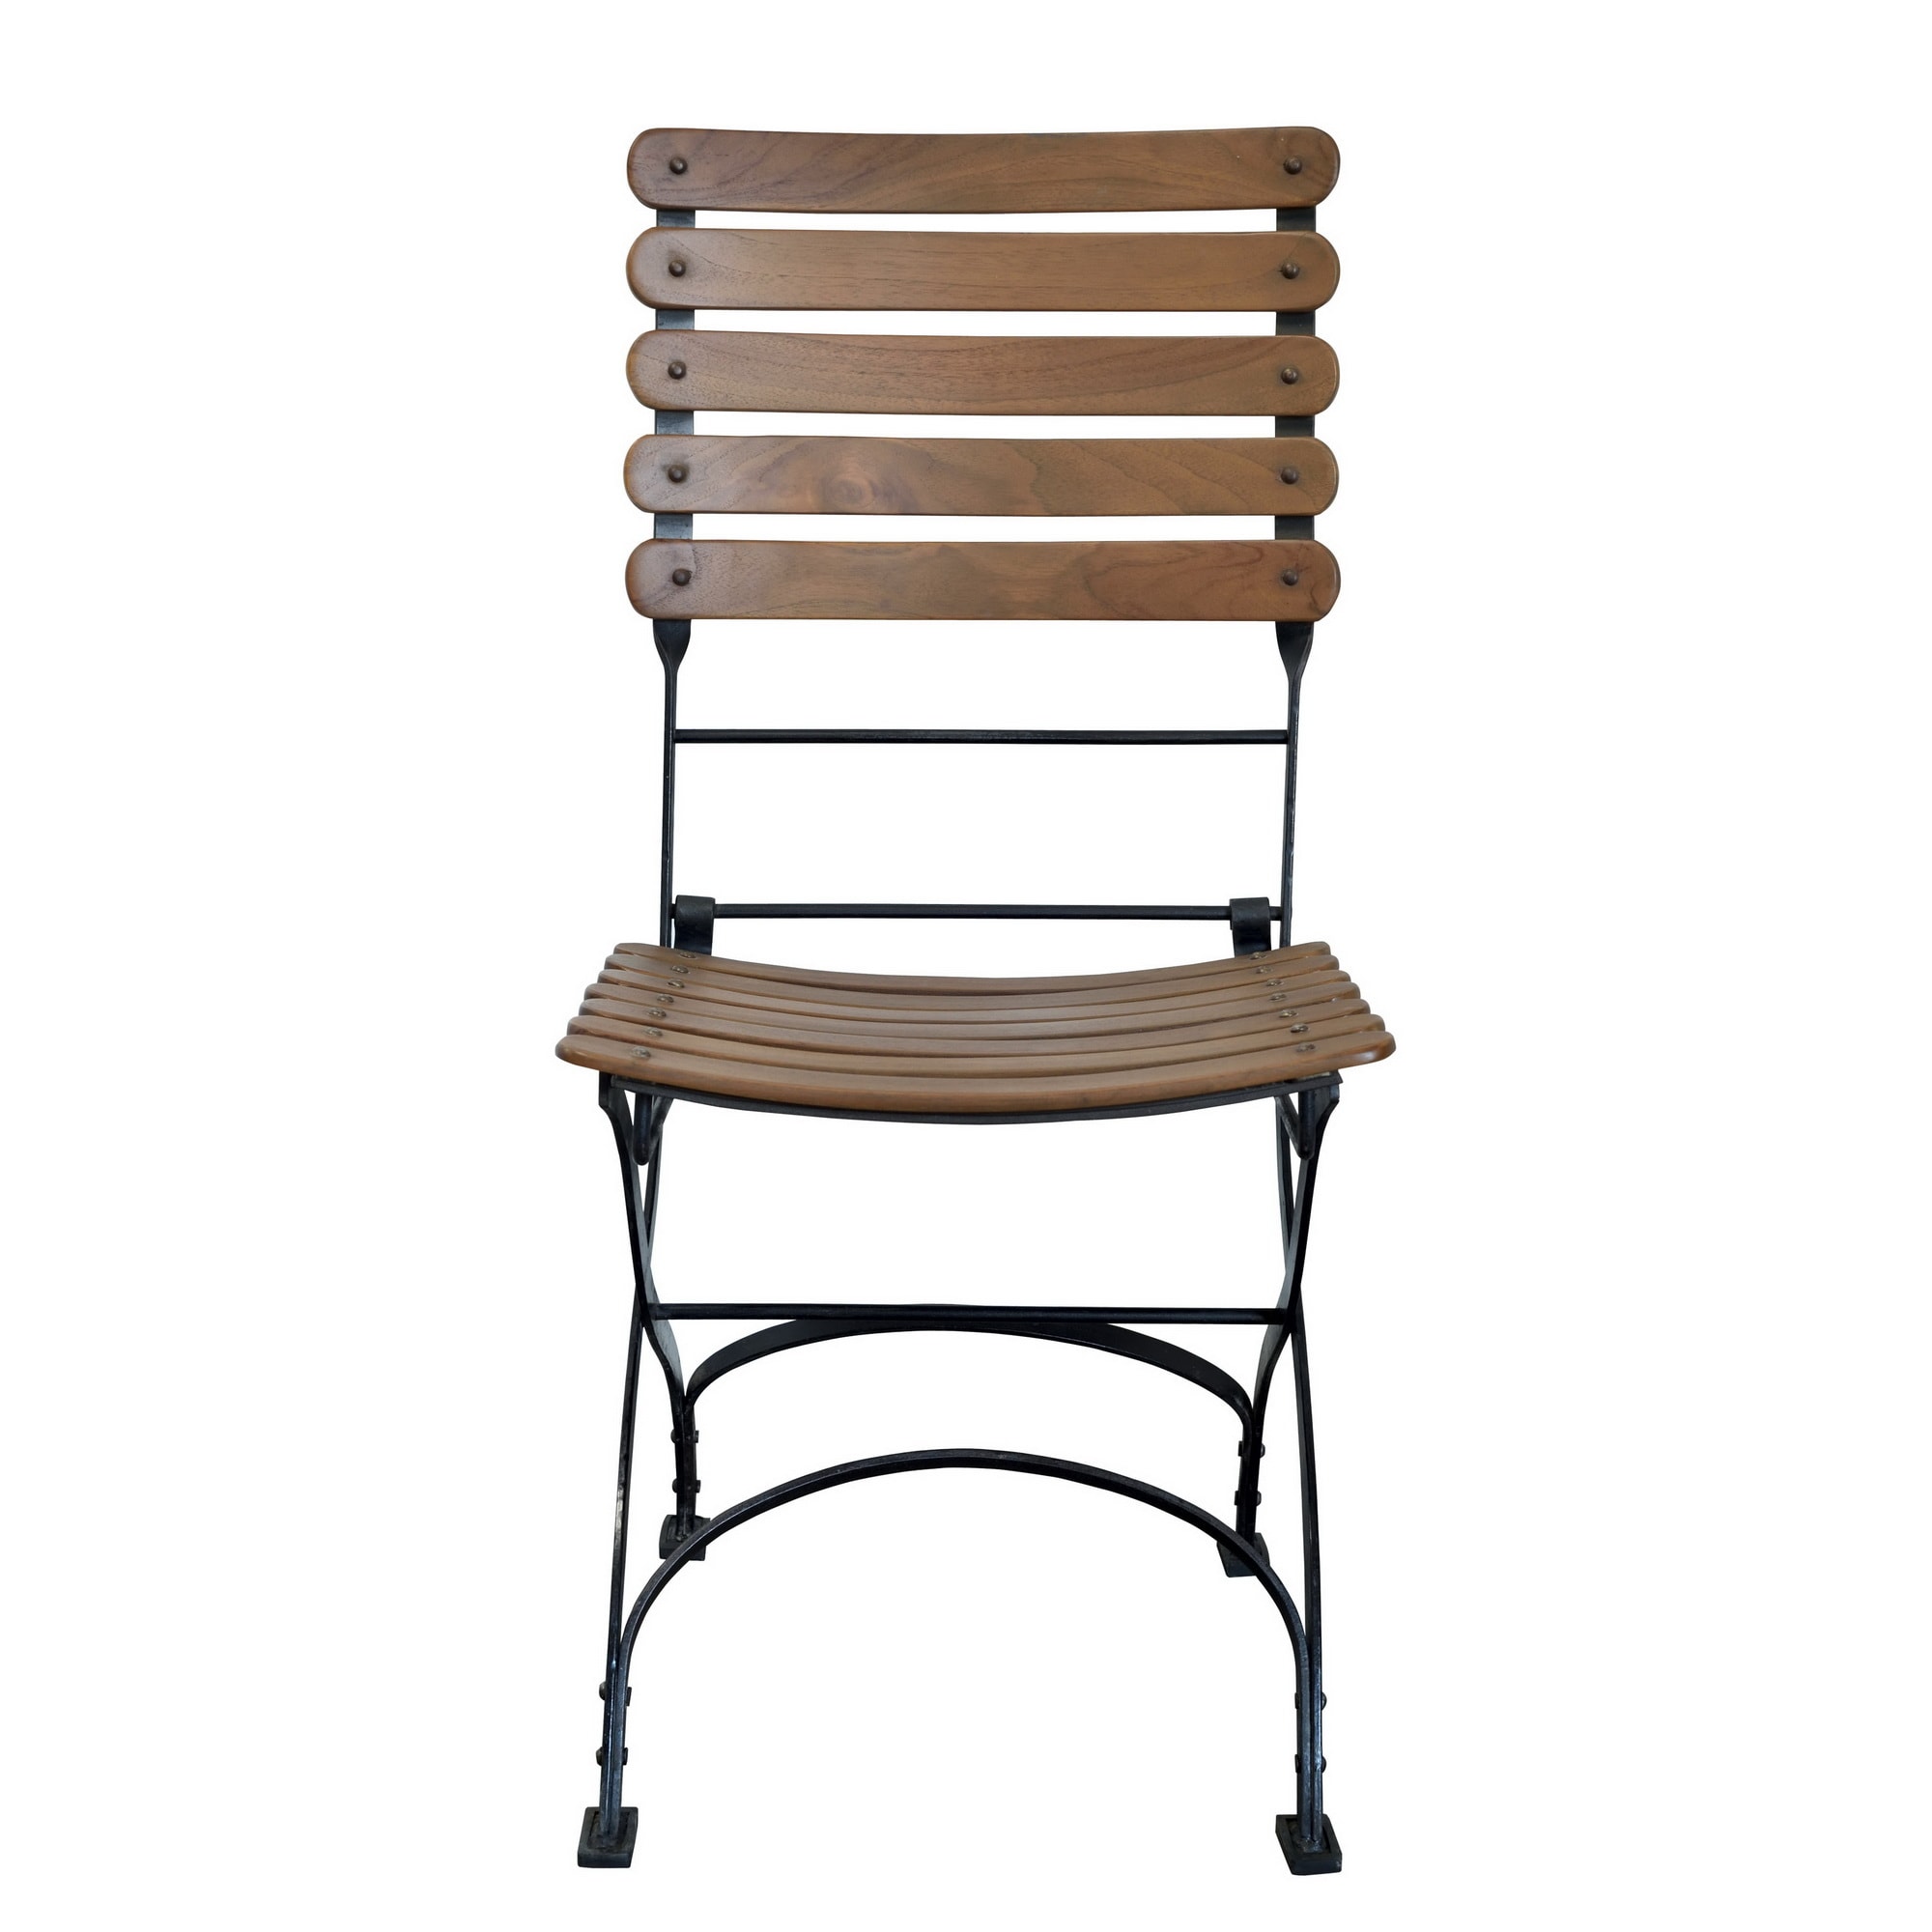 Casual Elements Exterior Medium Brown Metal Stationary Dining Chair(s) with Slat Seat in the Patio Chairs at Lowes.com